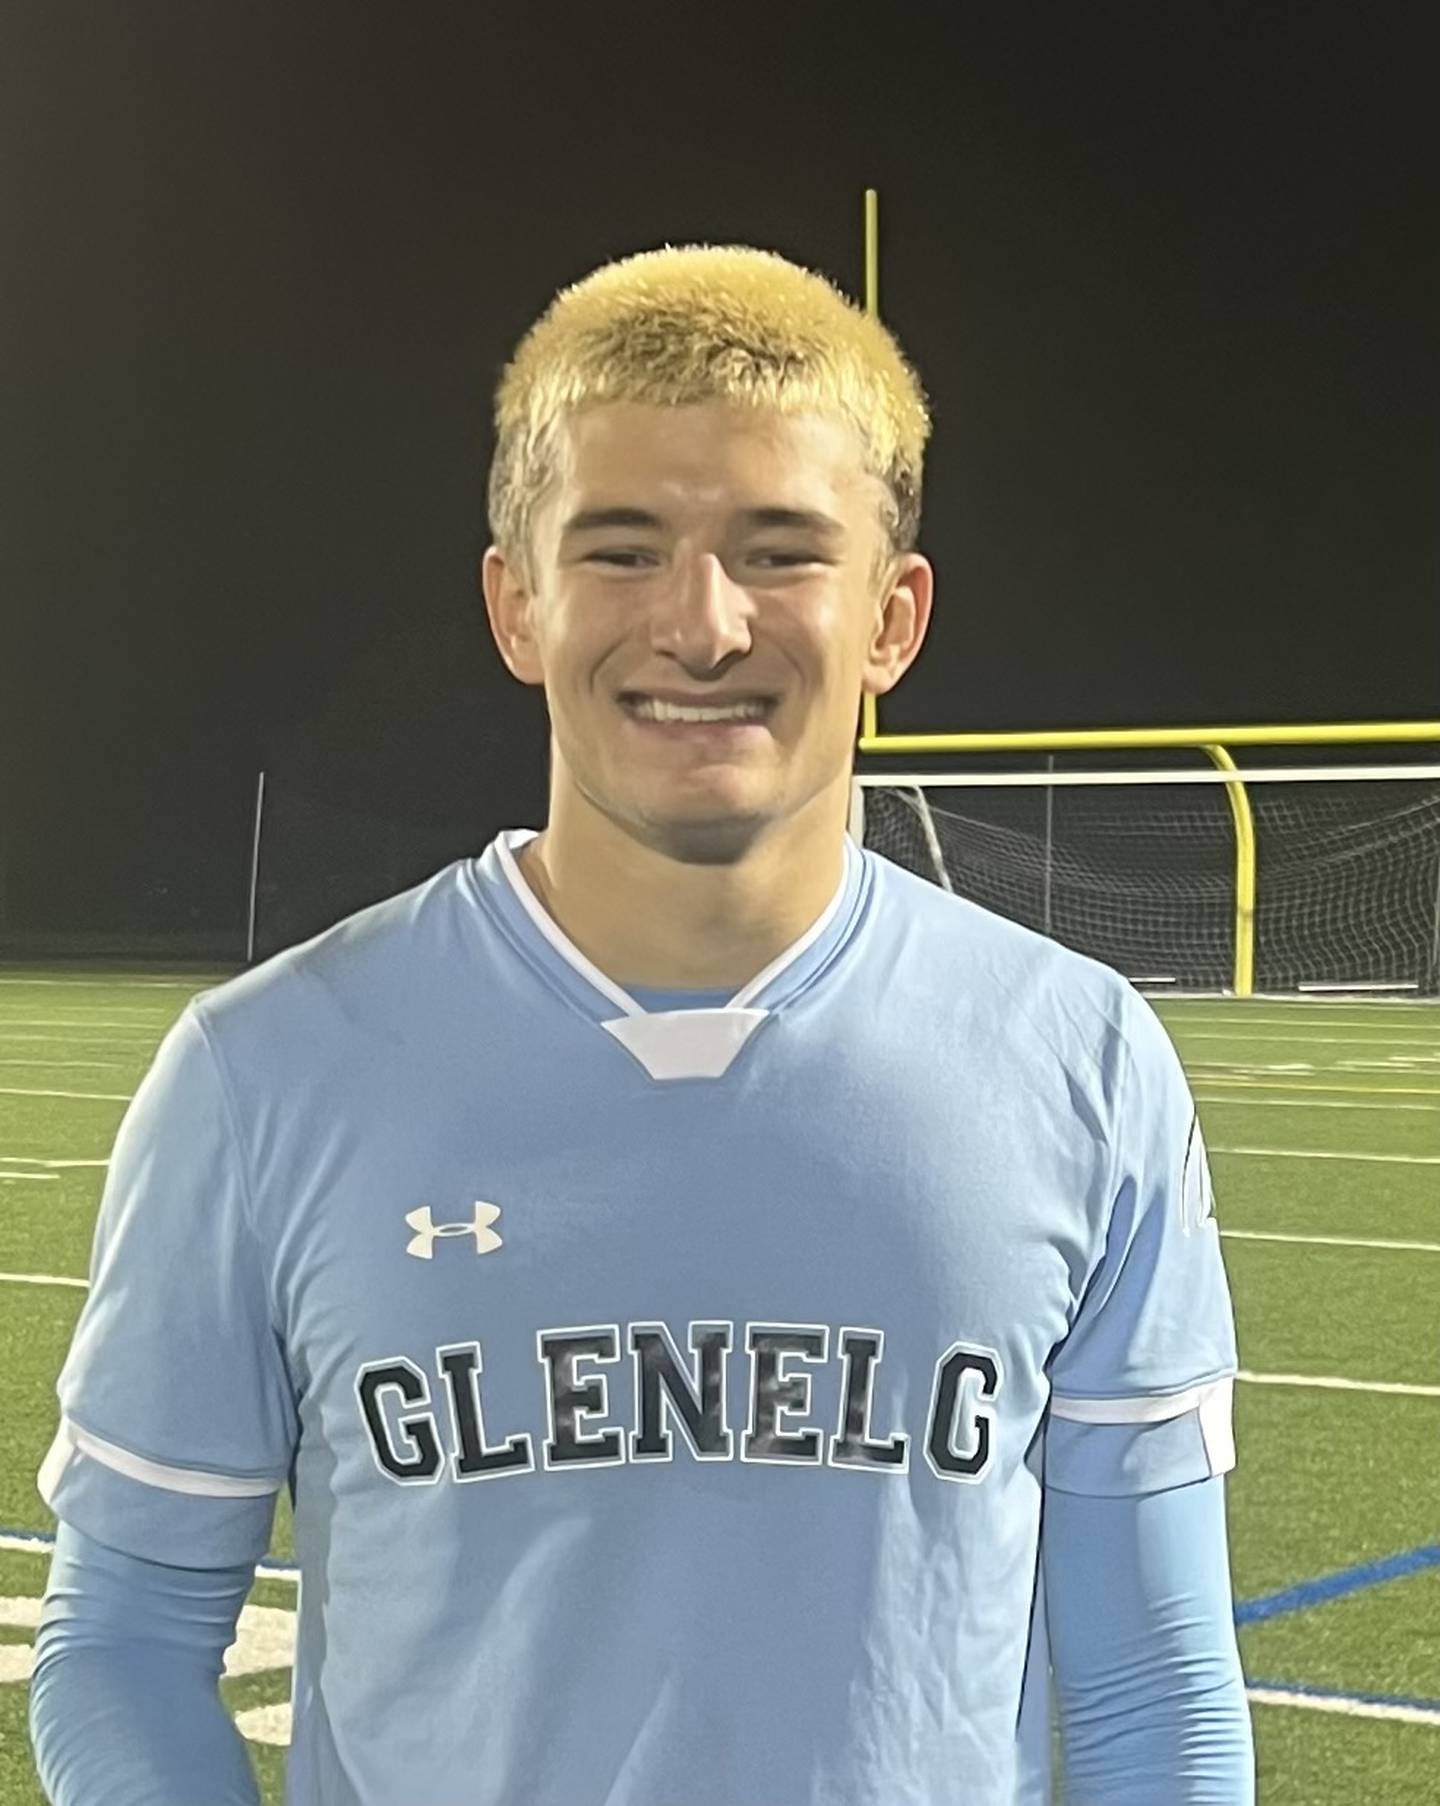 Glenelg goalie Joey Samstock came up big in the second half of Friday's Class 2A state quarterfinal against Sparrows Point.